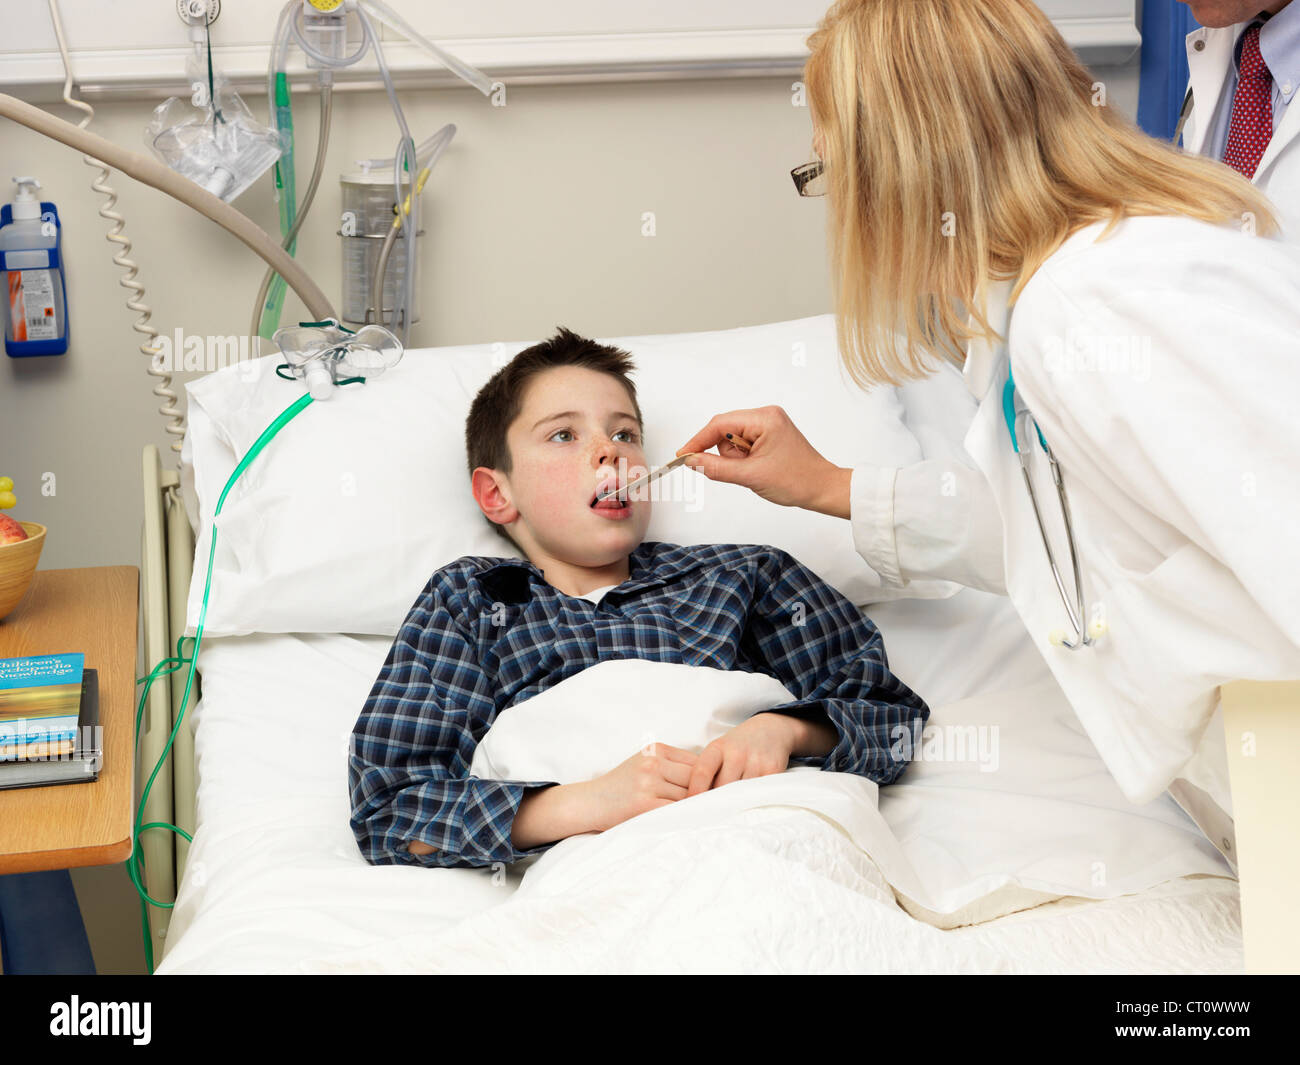 Doctor examining patient in hospital Stock Photo